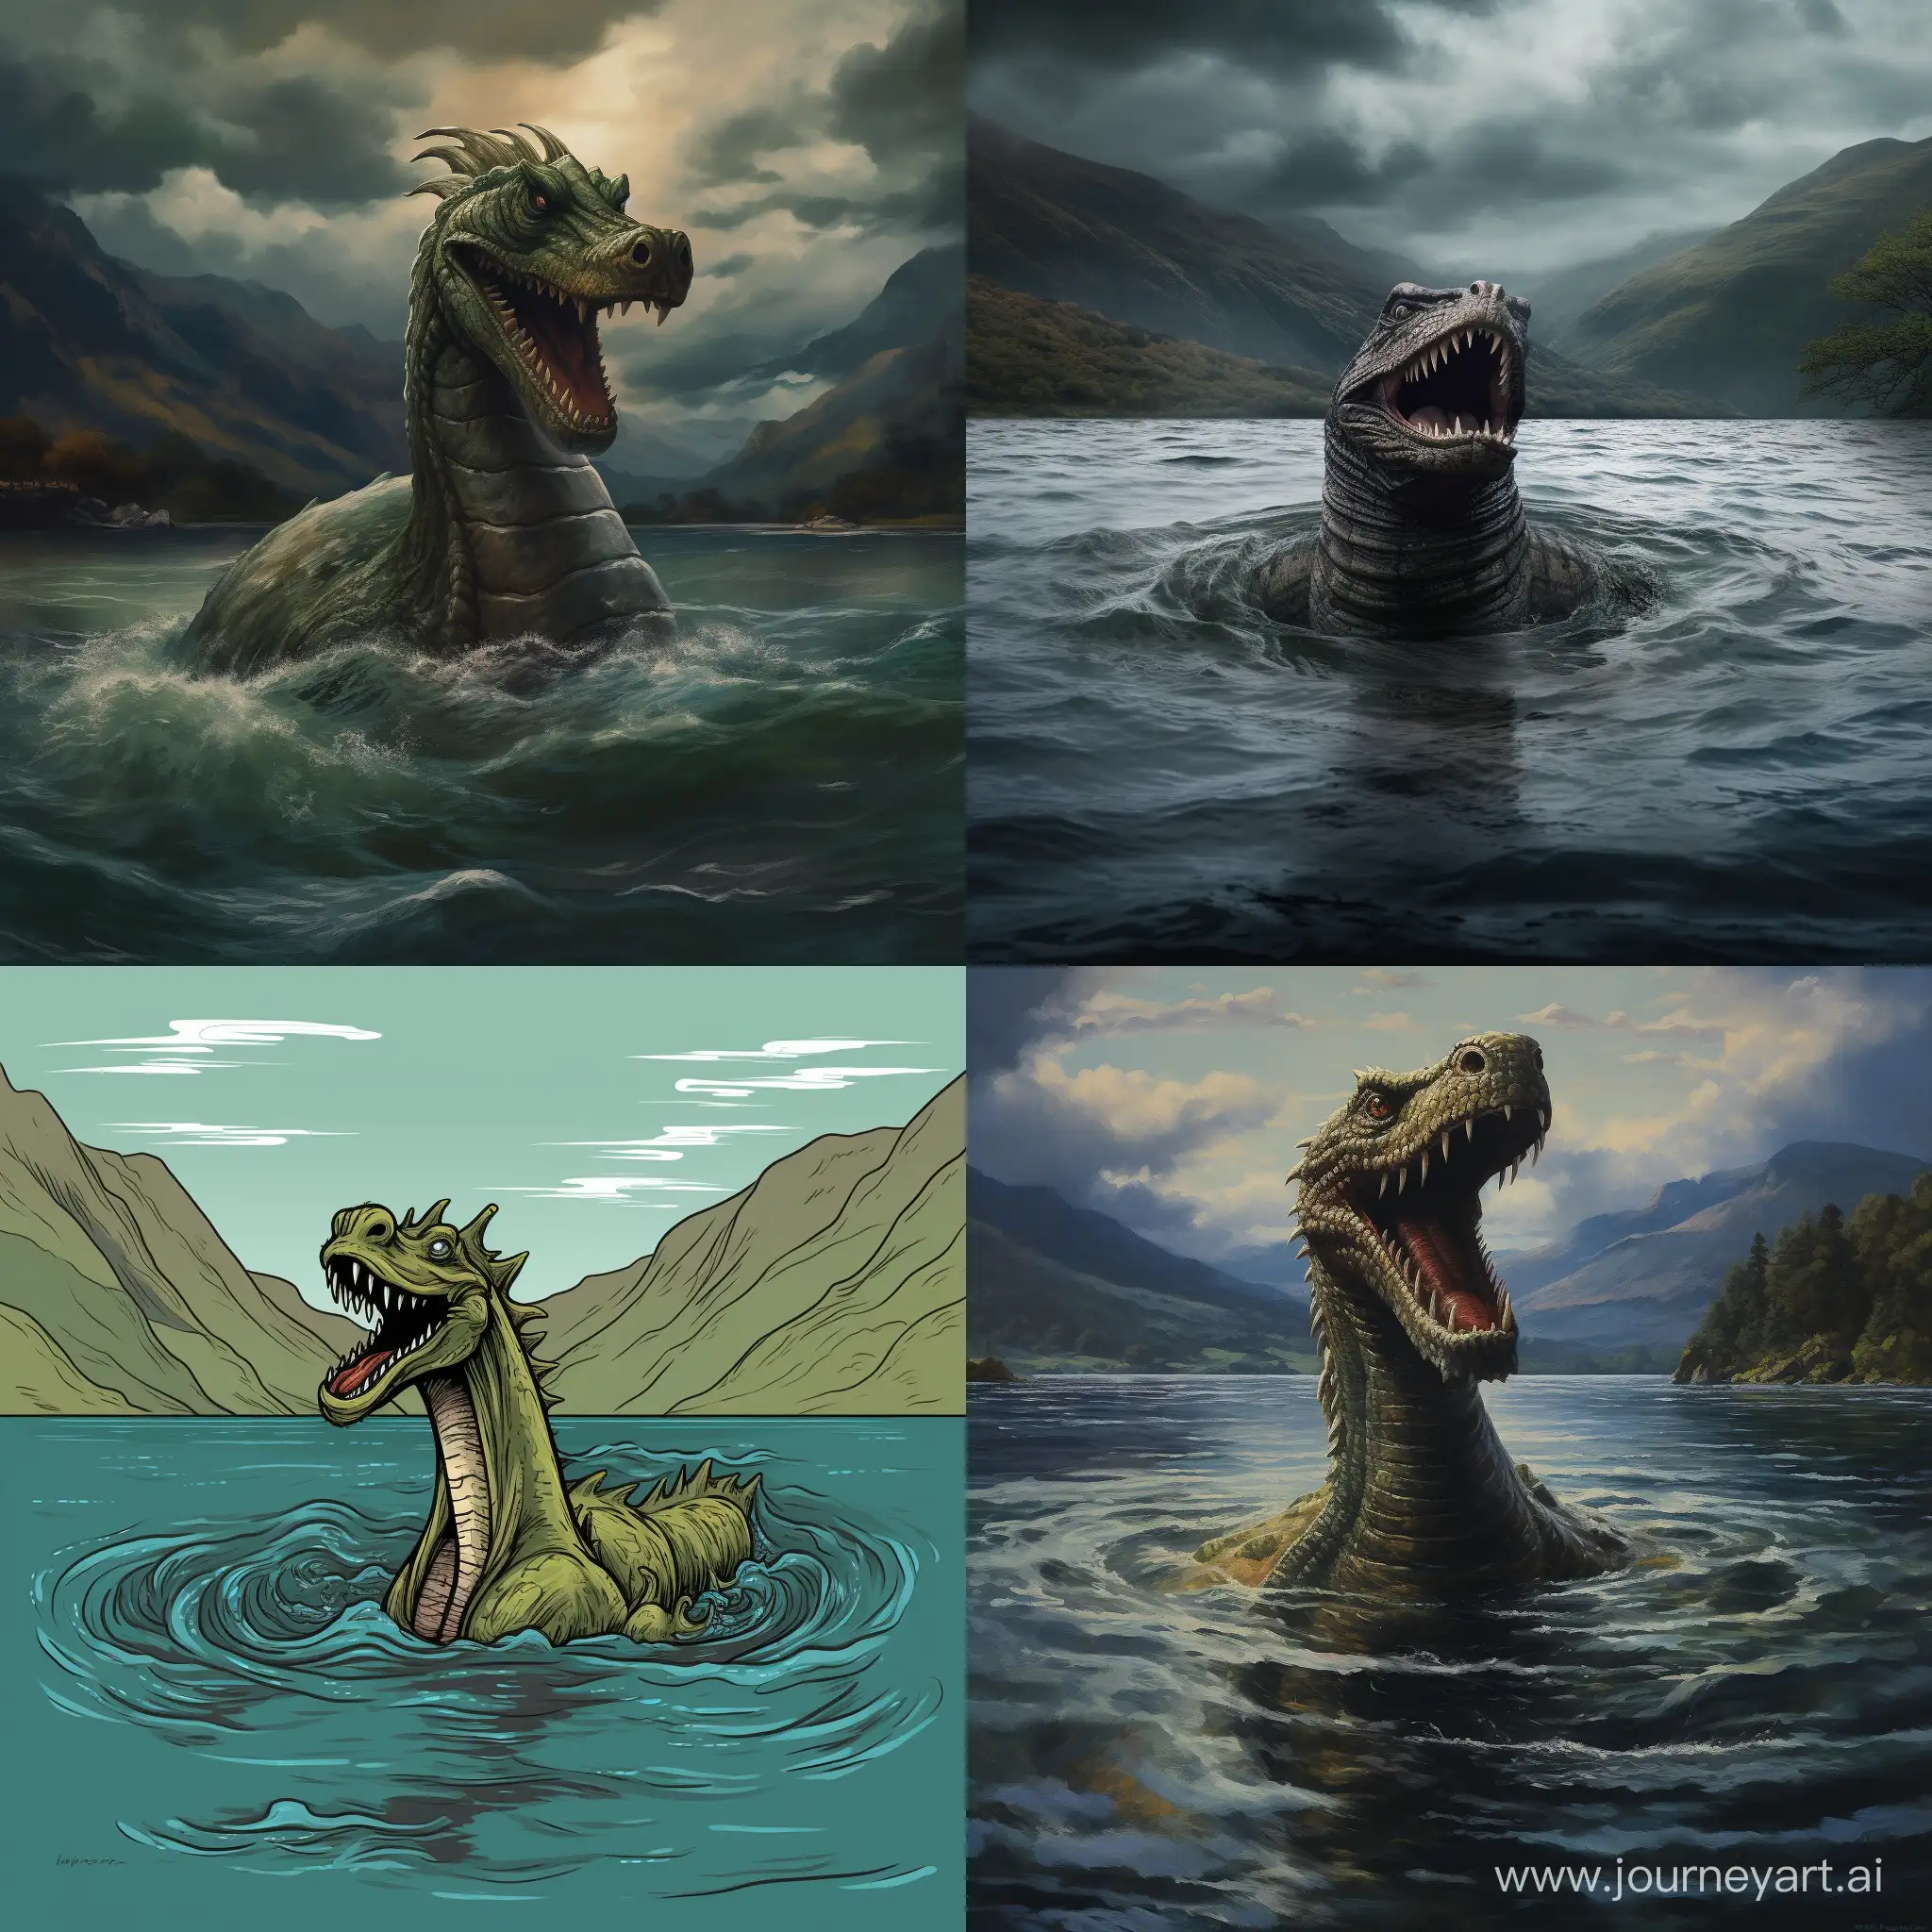 Mysterious-Encounter-Loch-Ness-Monster-Emerges-from-the-Lake